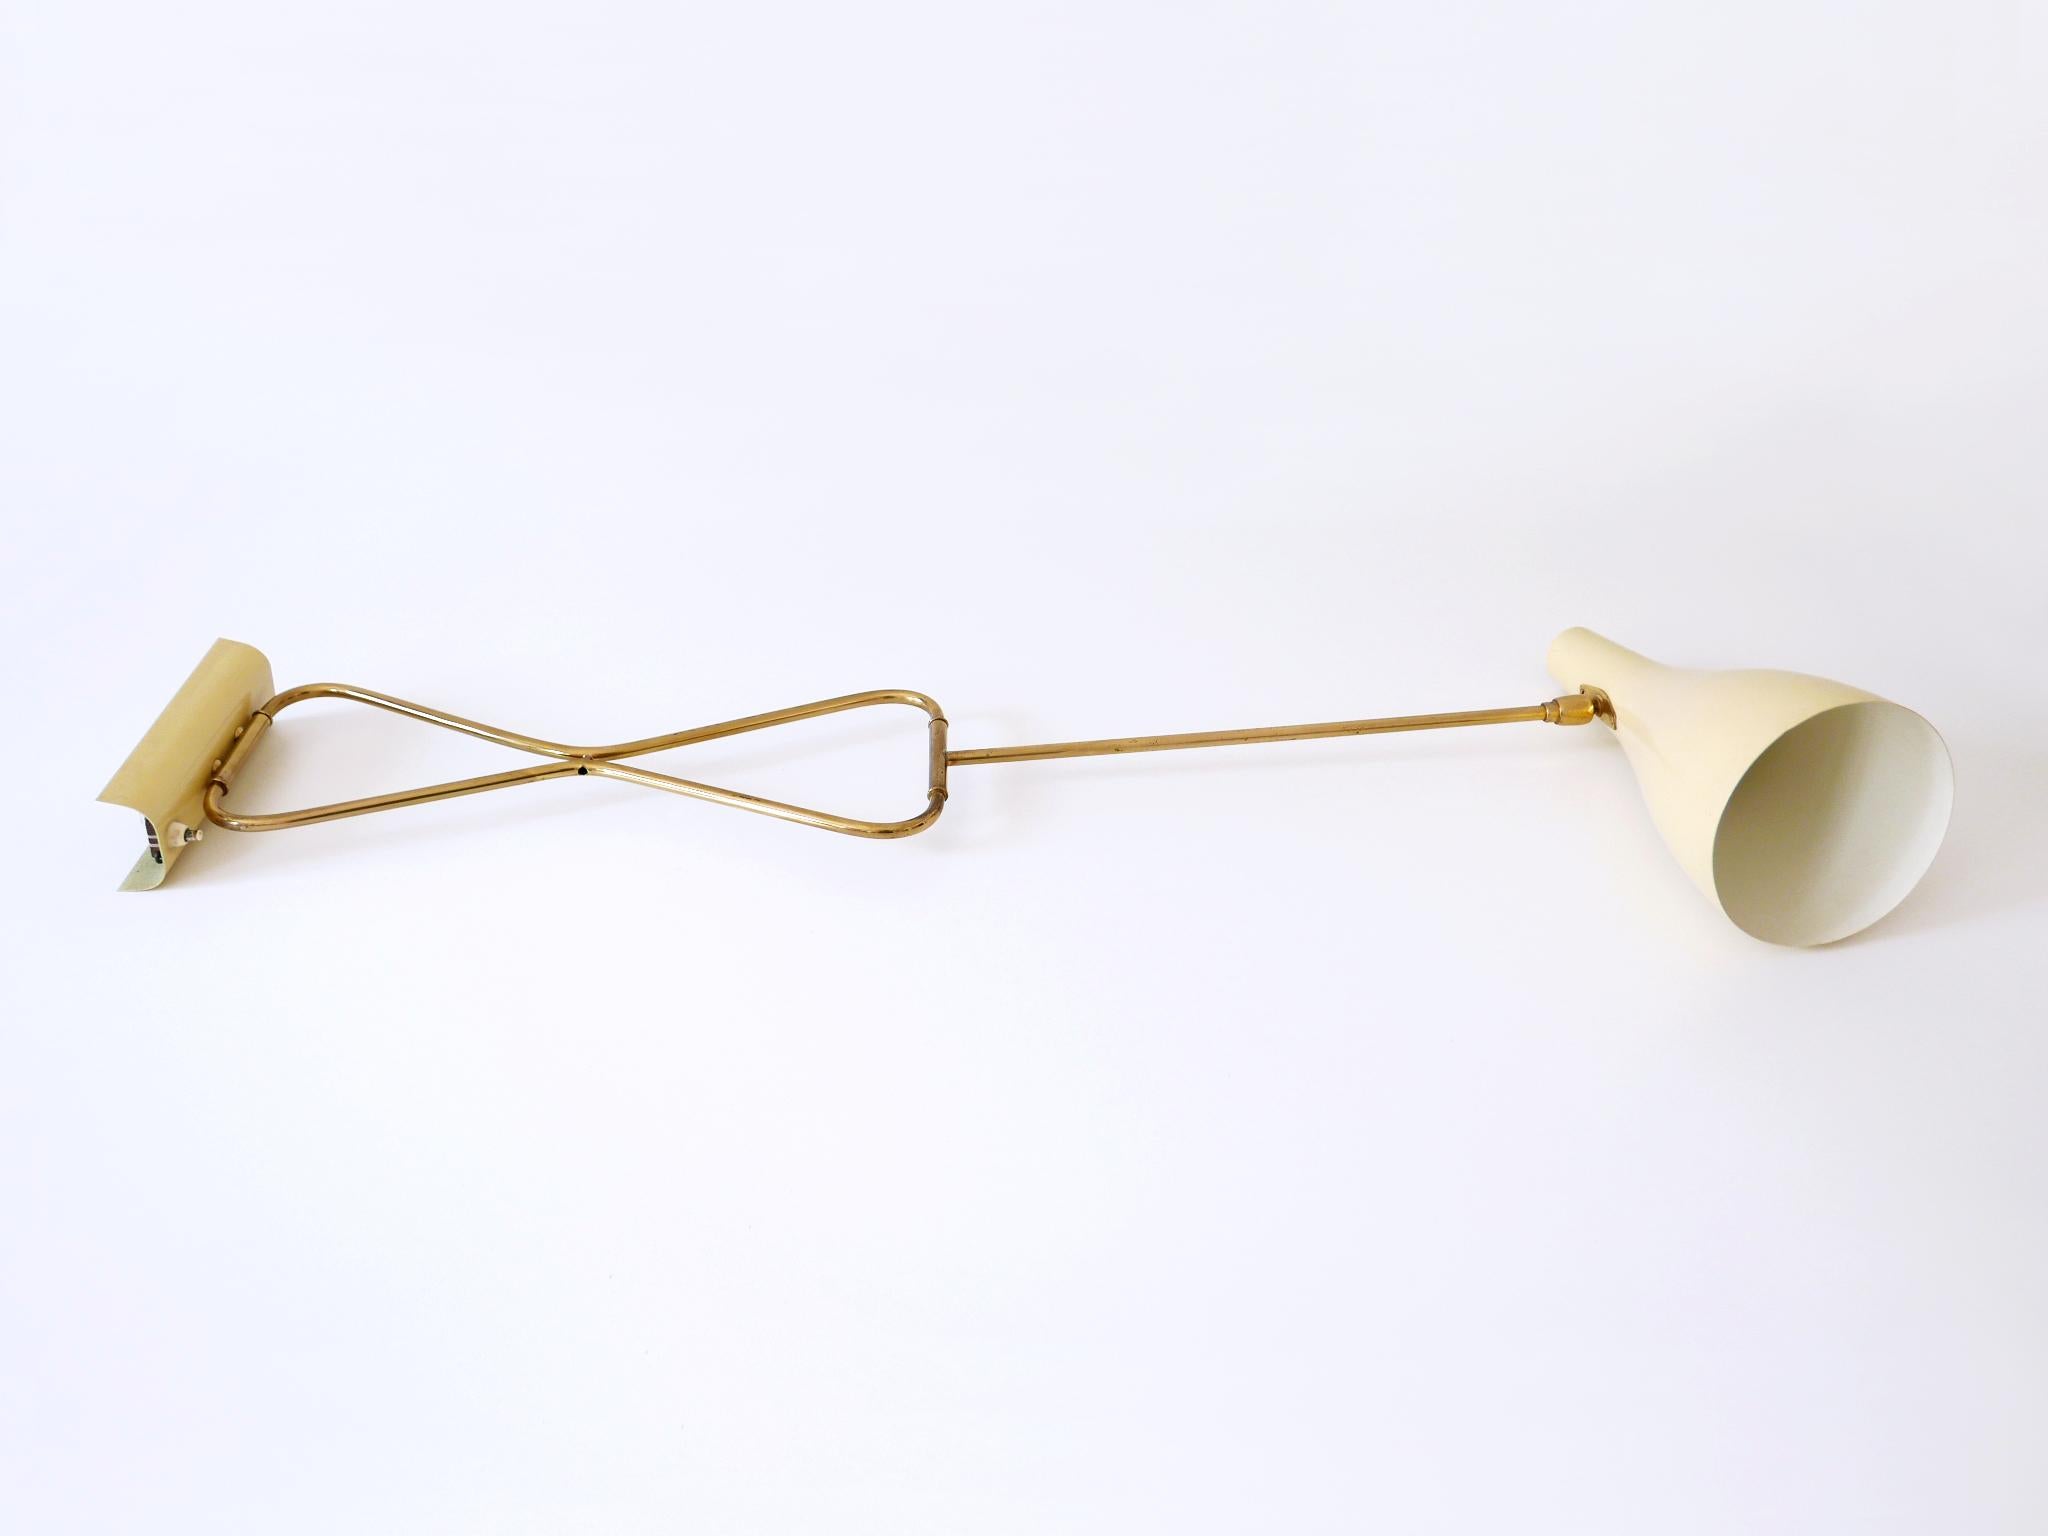 Rare & Elegant Mid Century Modern Wall Lamp '9590/28' by Cosack Germany 1950s For Sale 8